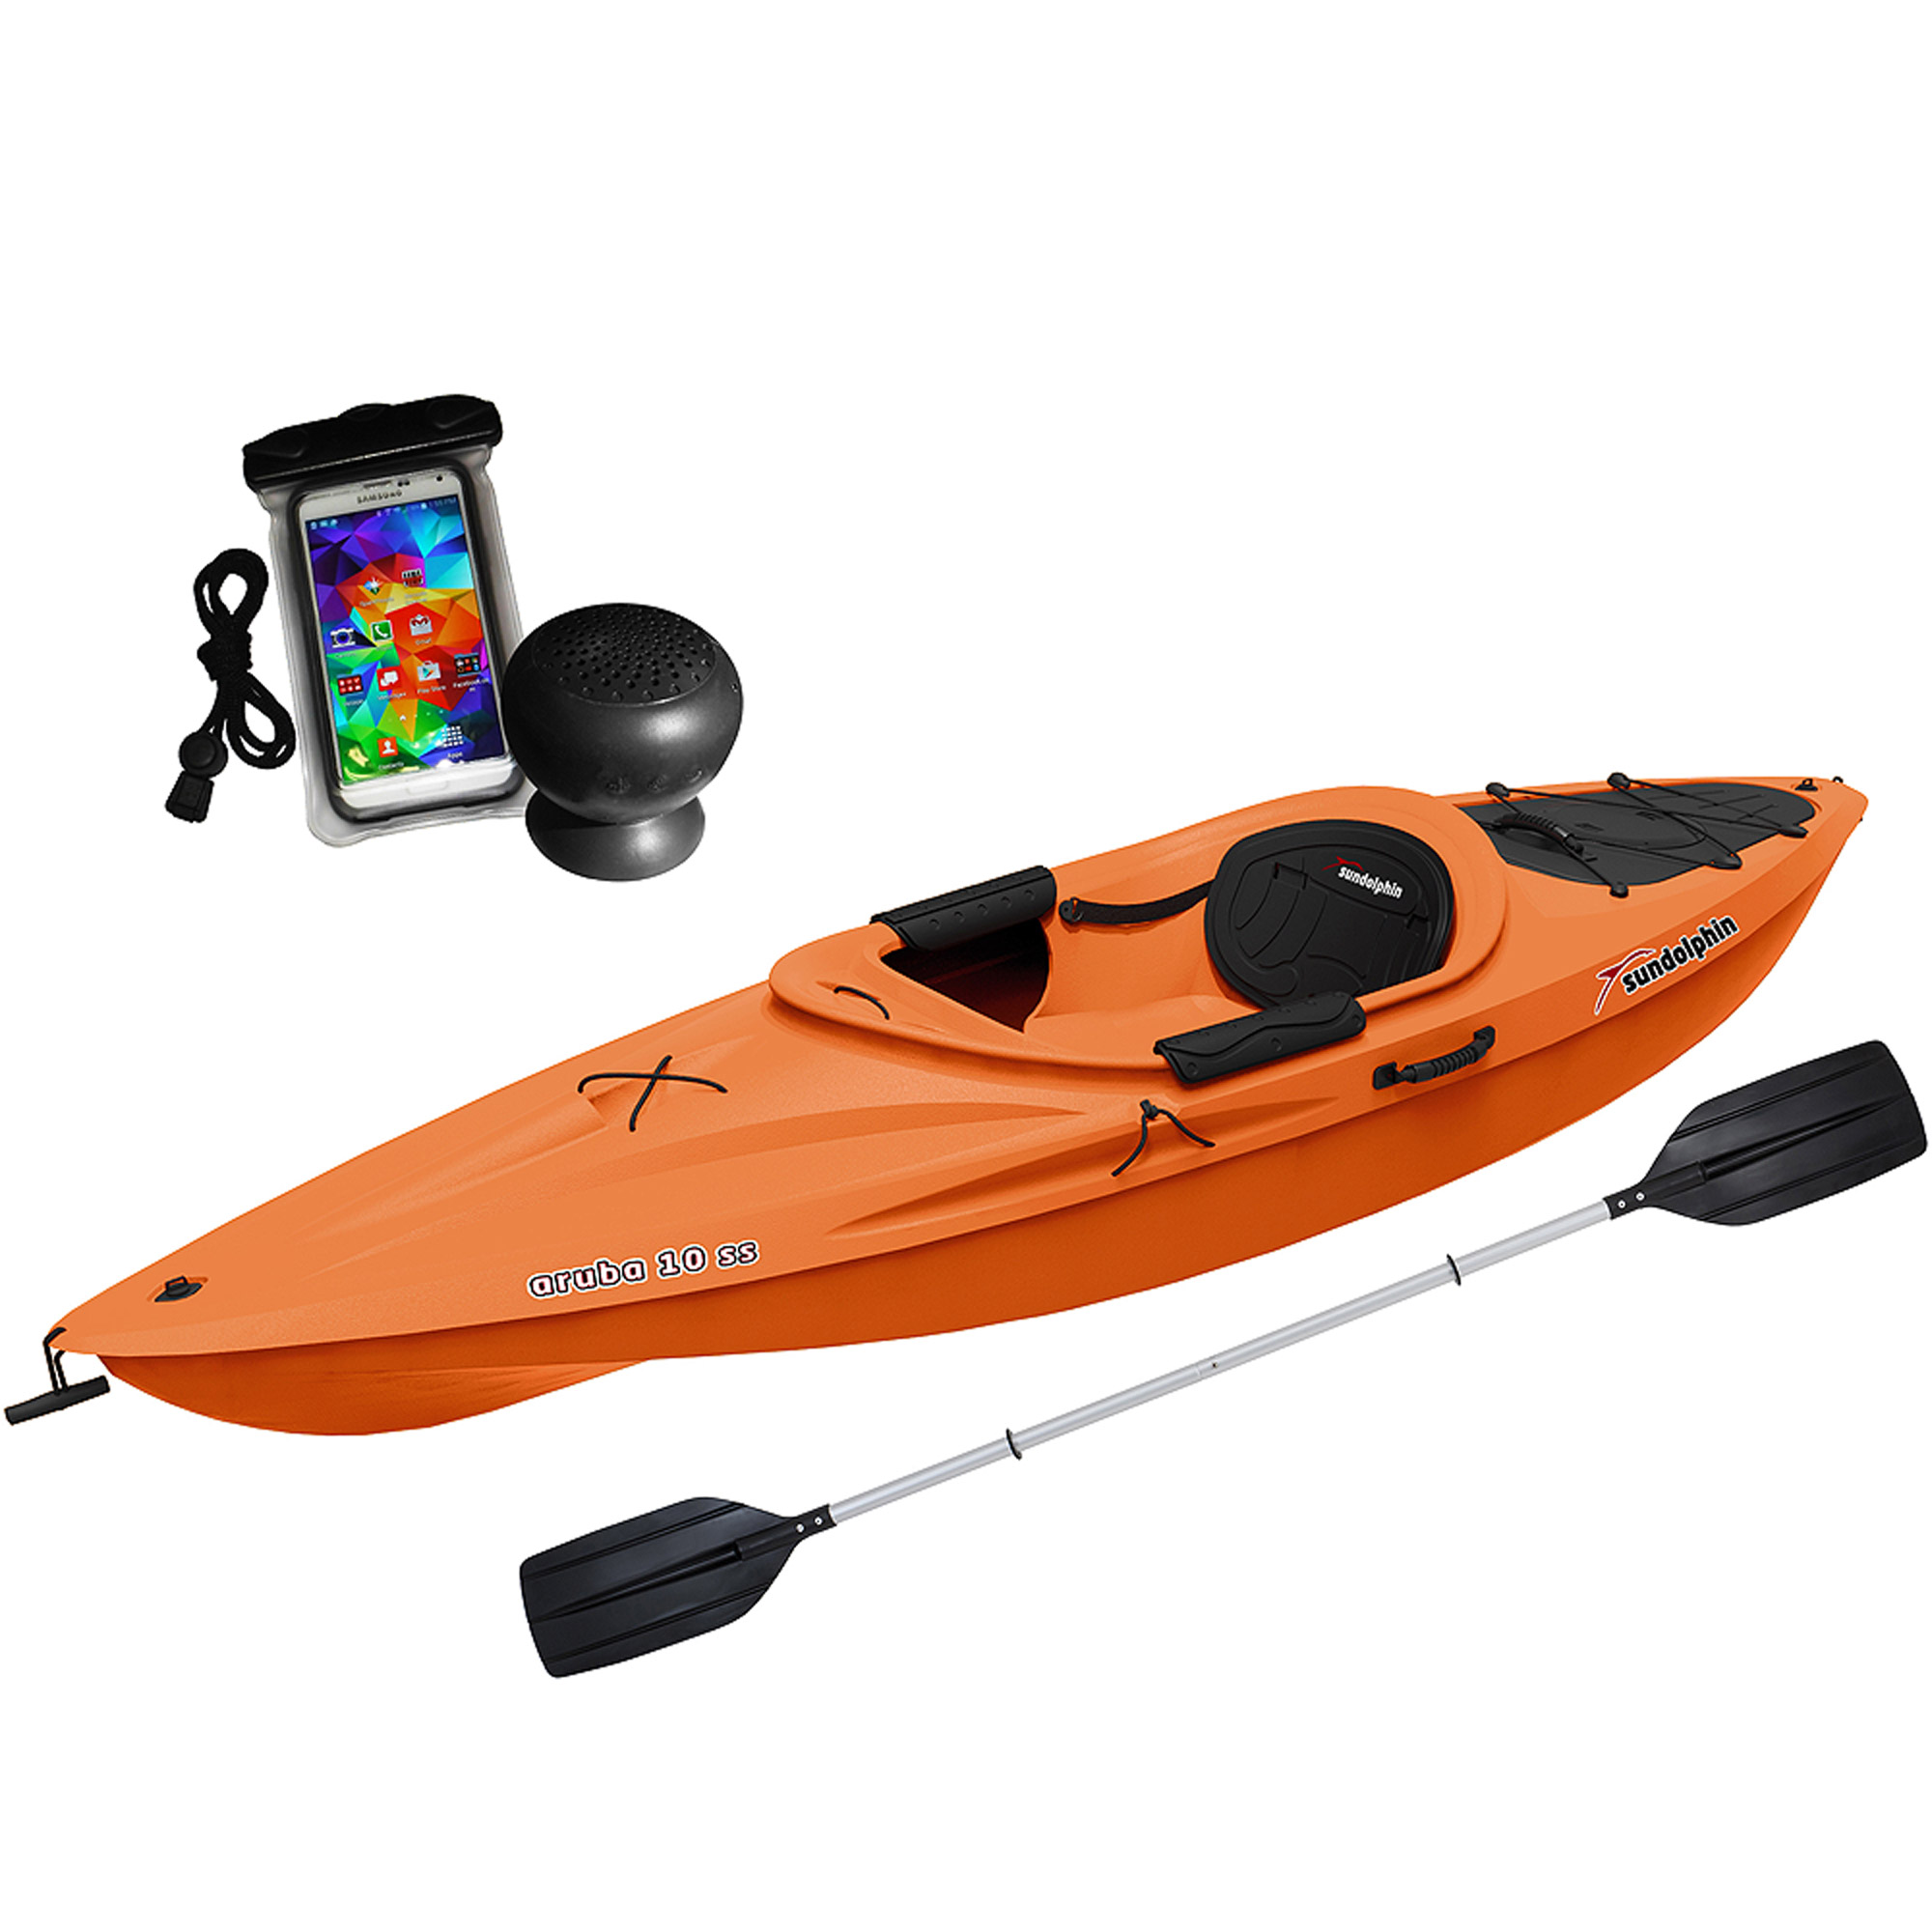 Sun Dolphin Aruba 10 SS with Speaker and Bag, Paddle Included - image 1 of 5